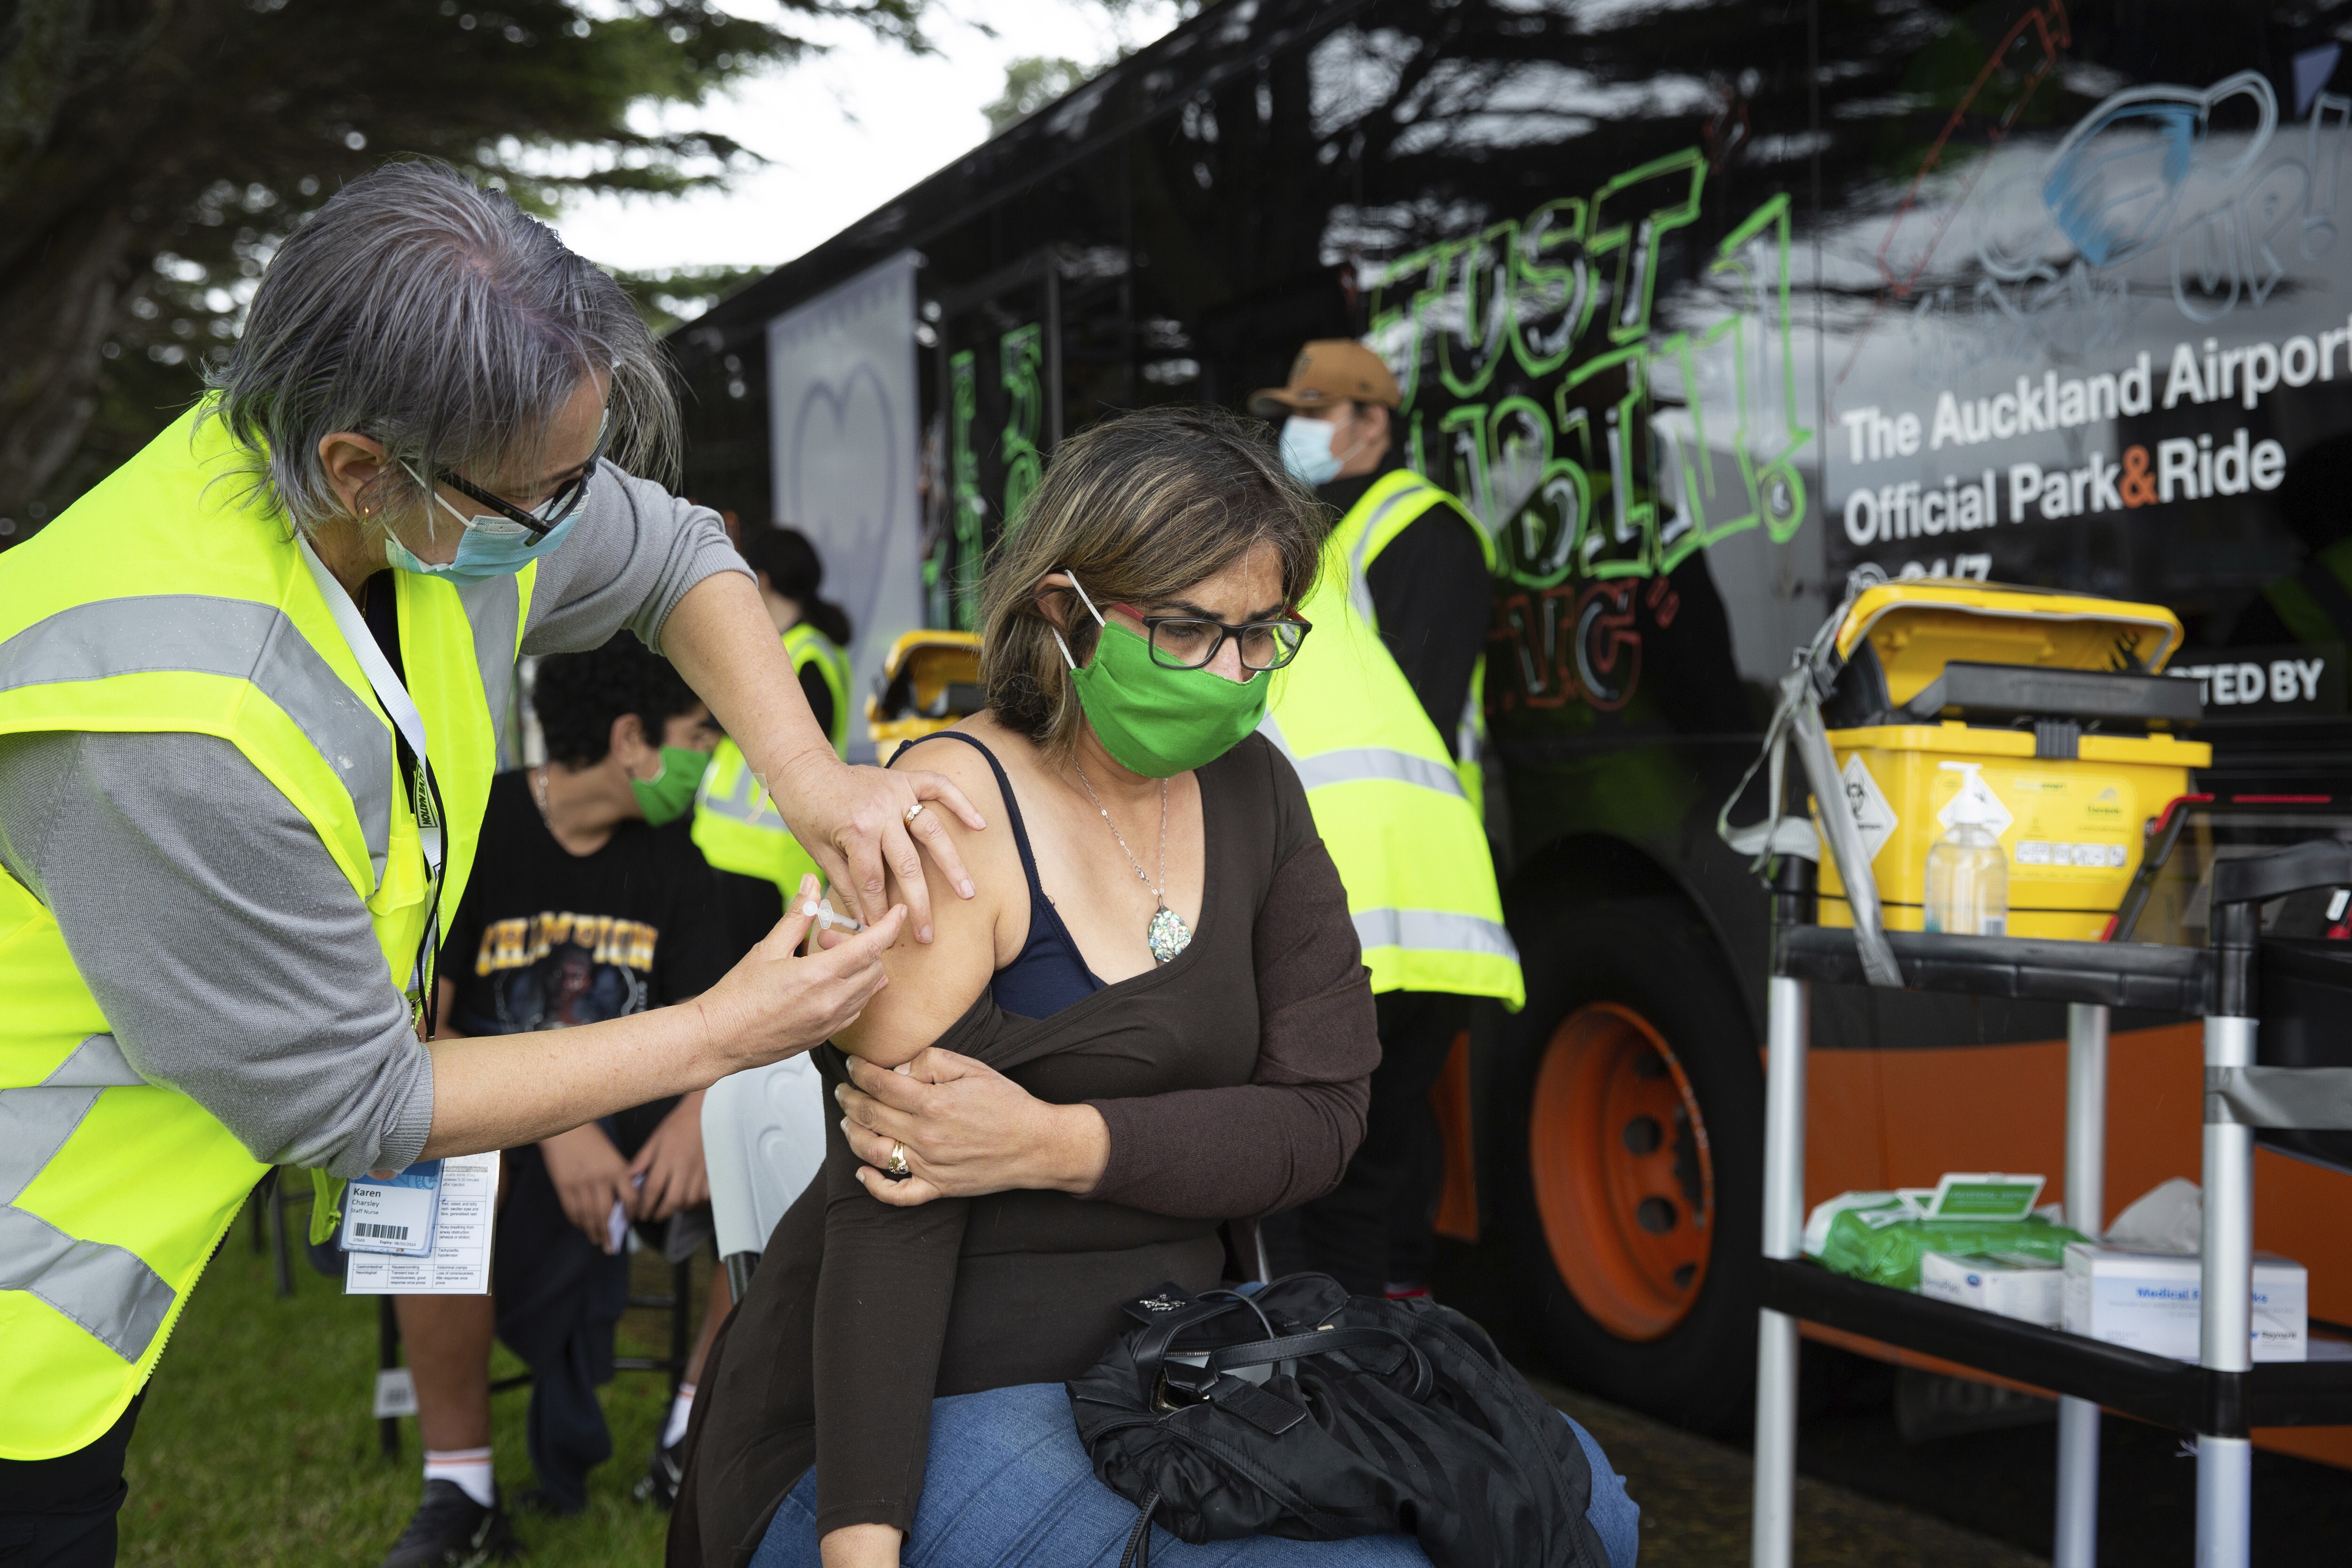 A woman receives a vaccination against Covid-19 at a mobile clinic in Auckland. Photo: NZ Herald via AP